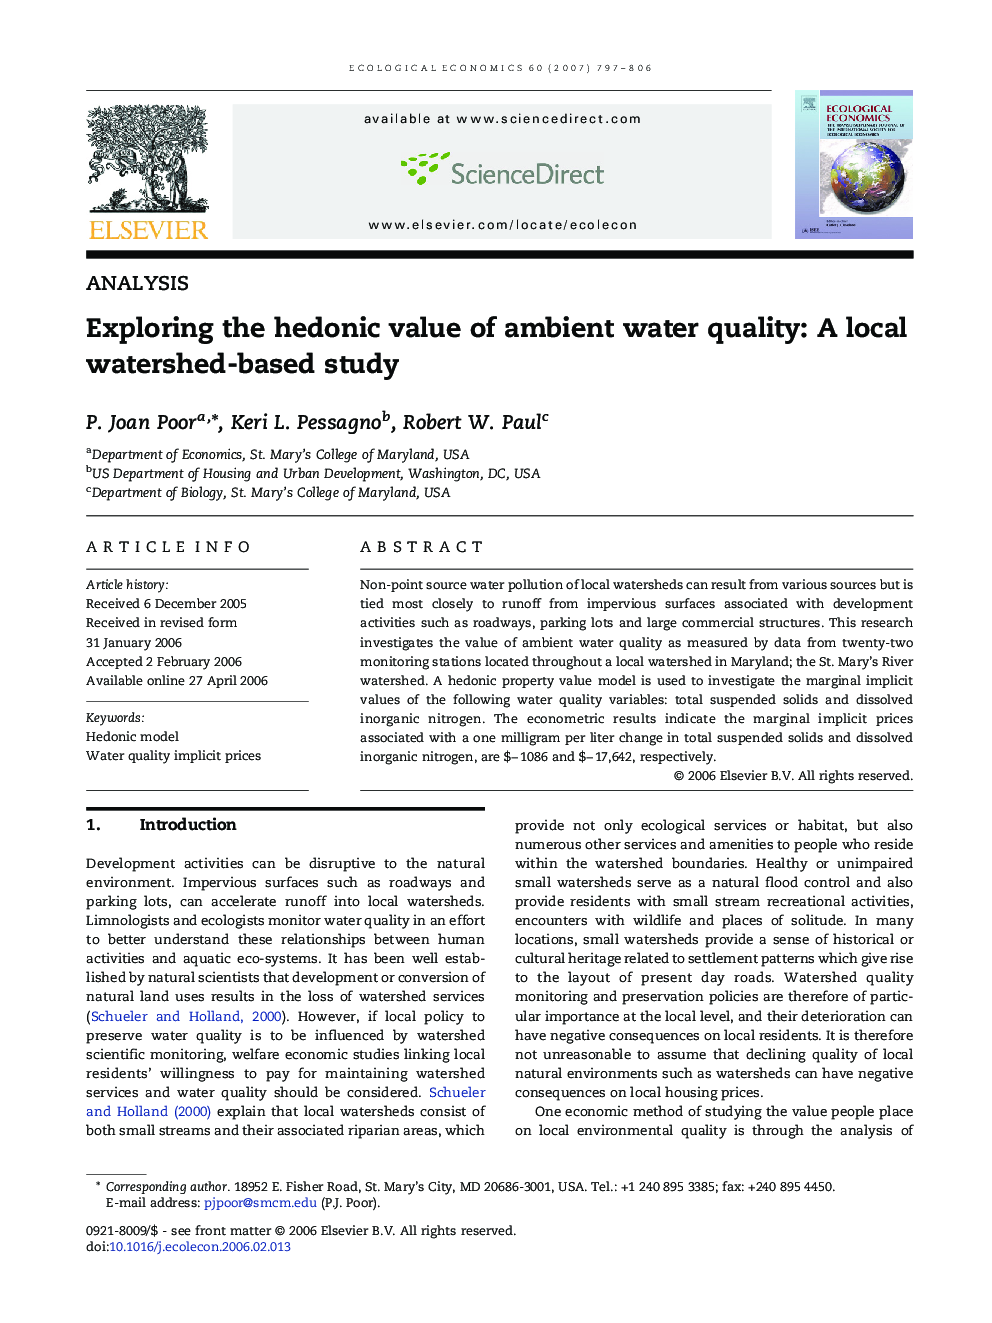 Exploring the hedonic value of ambient water quality: A local watershed-based study